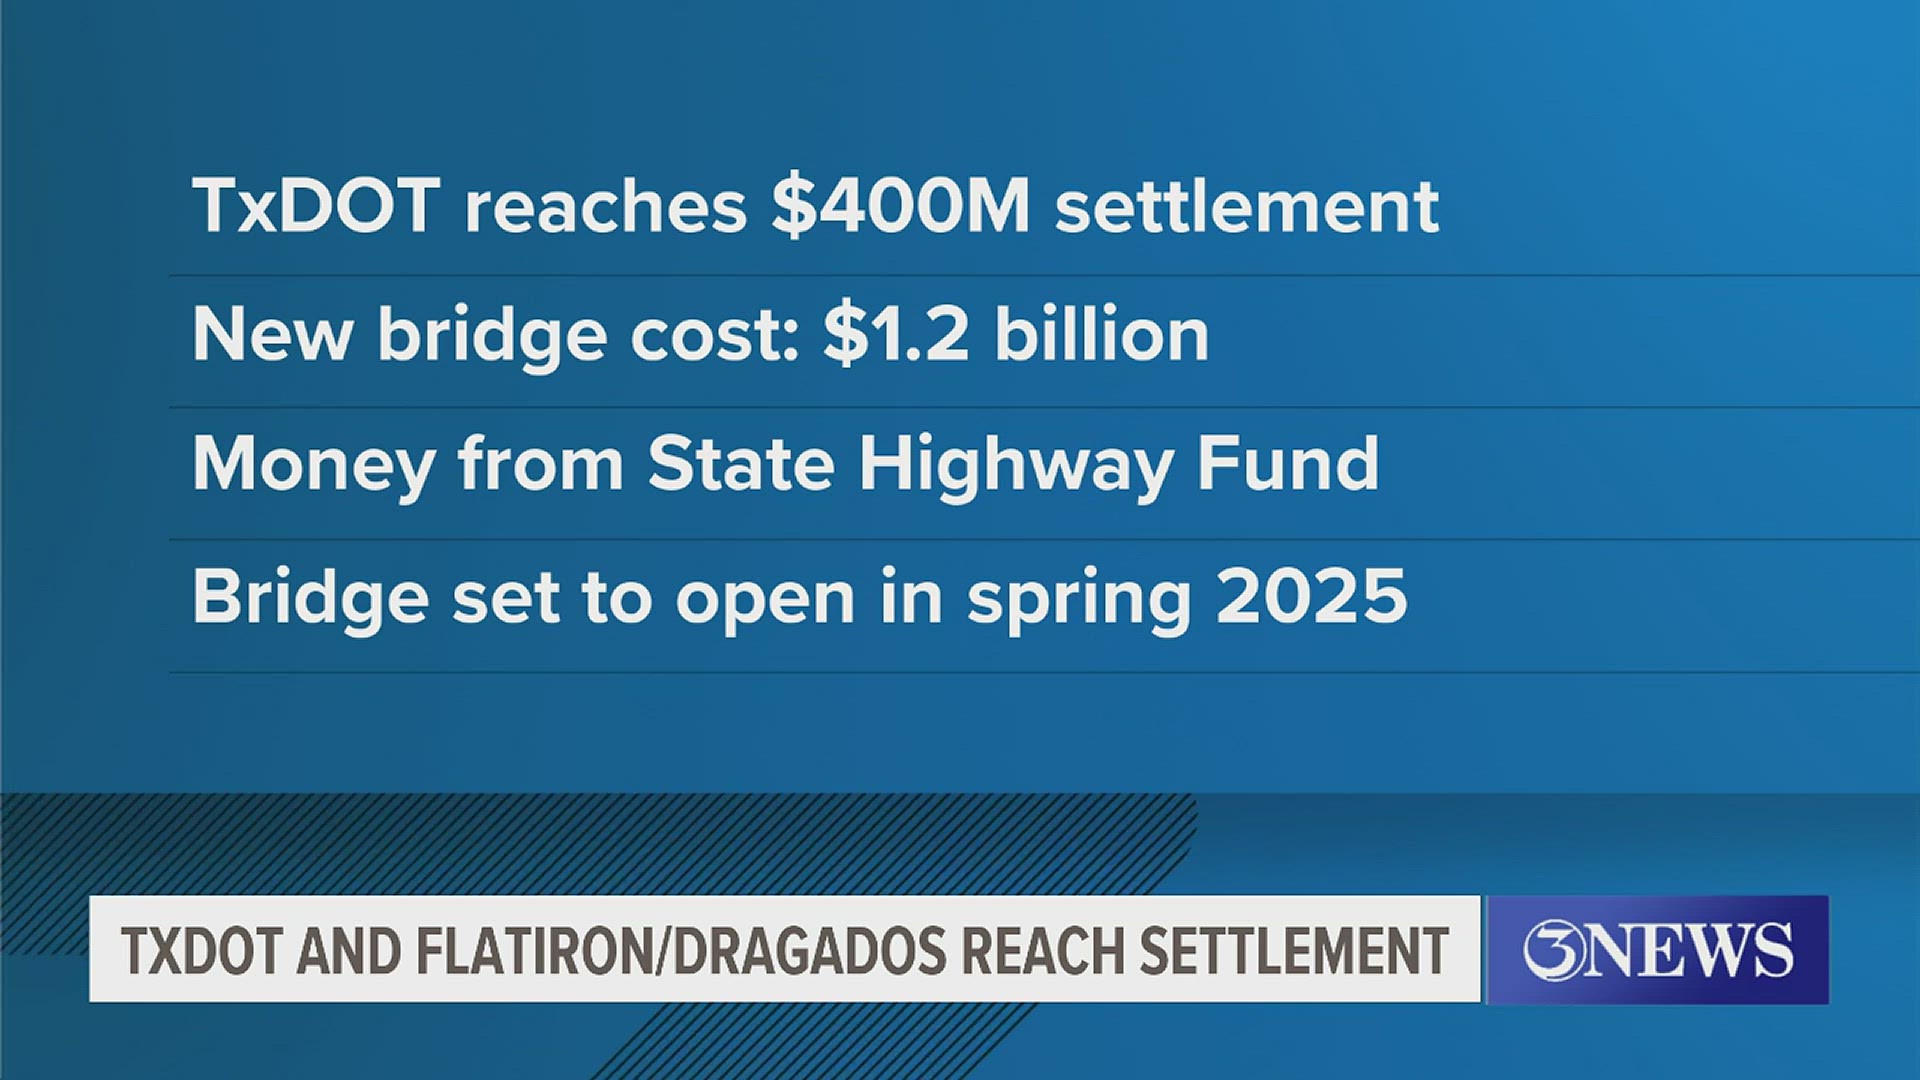 TxDOT agreed to end its notice of default against developer Flatiron Dragados LLC. TxDOT will pay $400 million as part of the agreement.